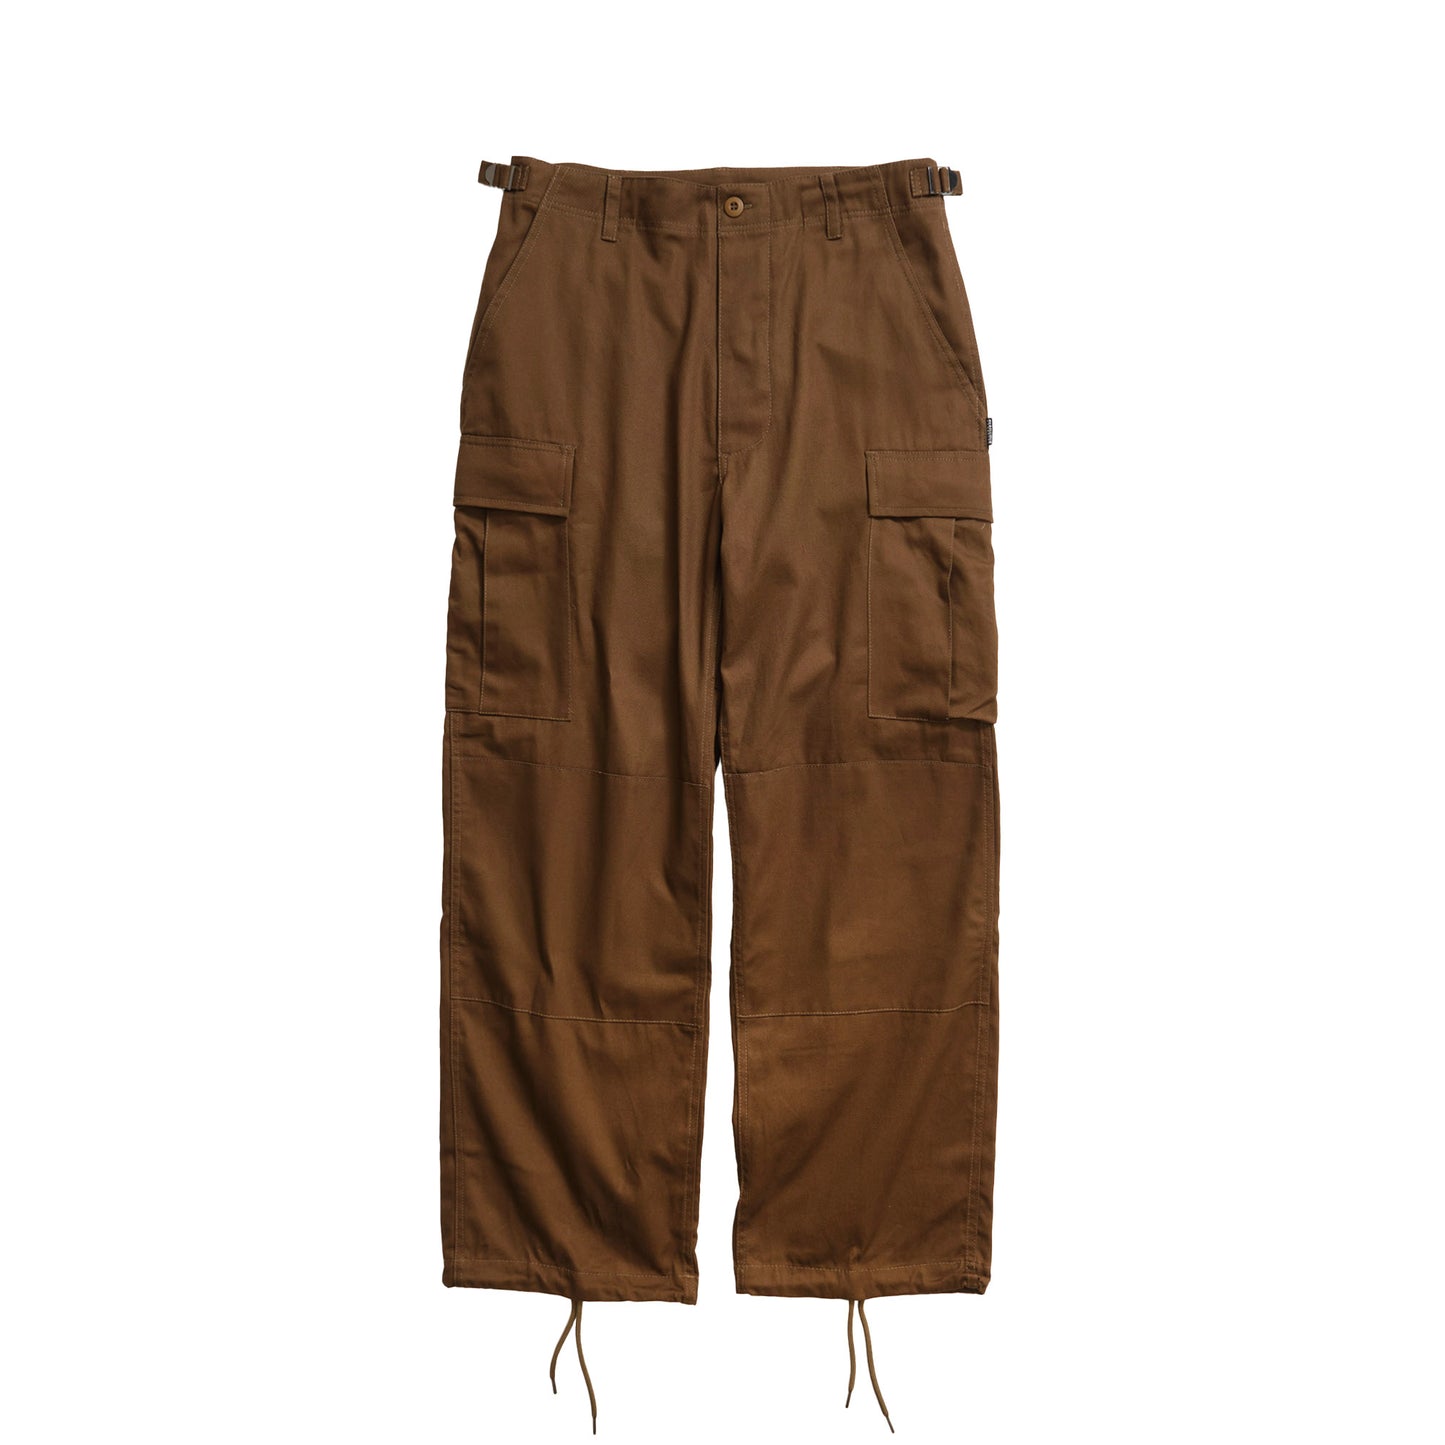 RBLS MILITARY CARGO PANTS